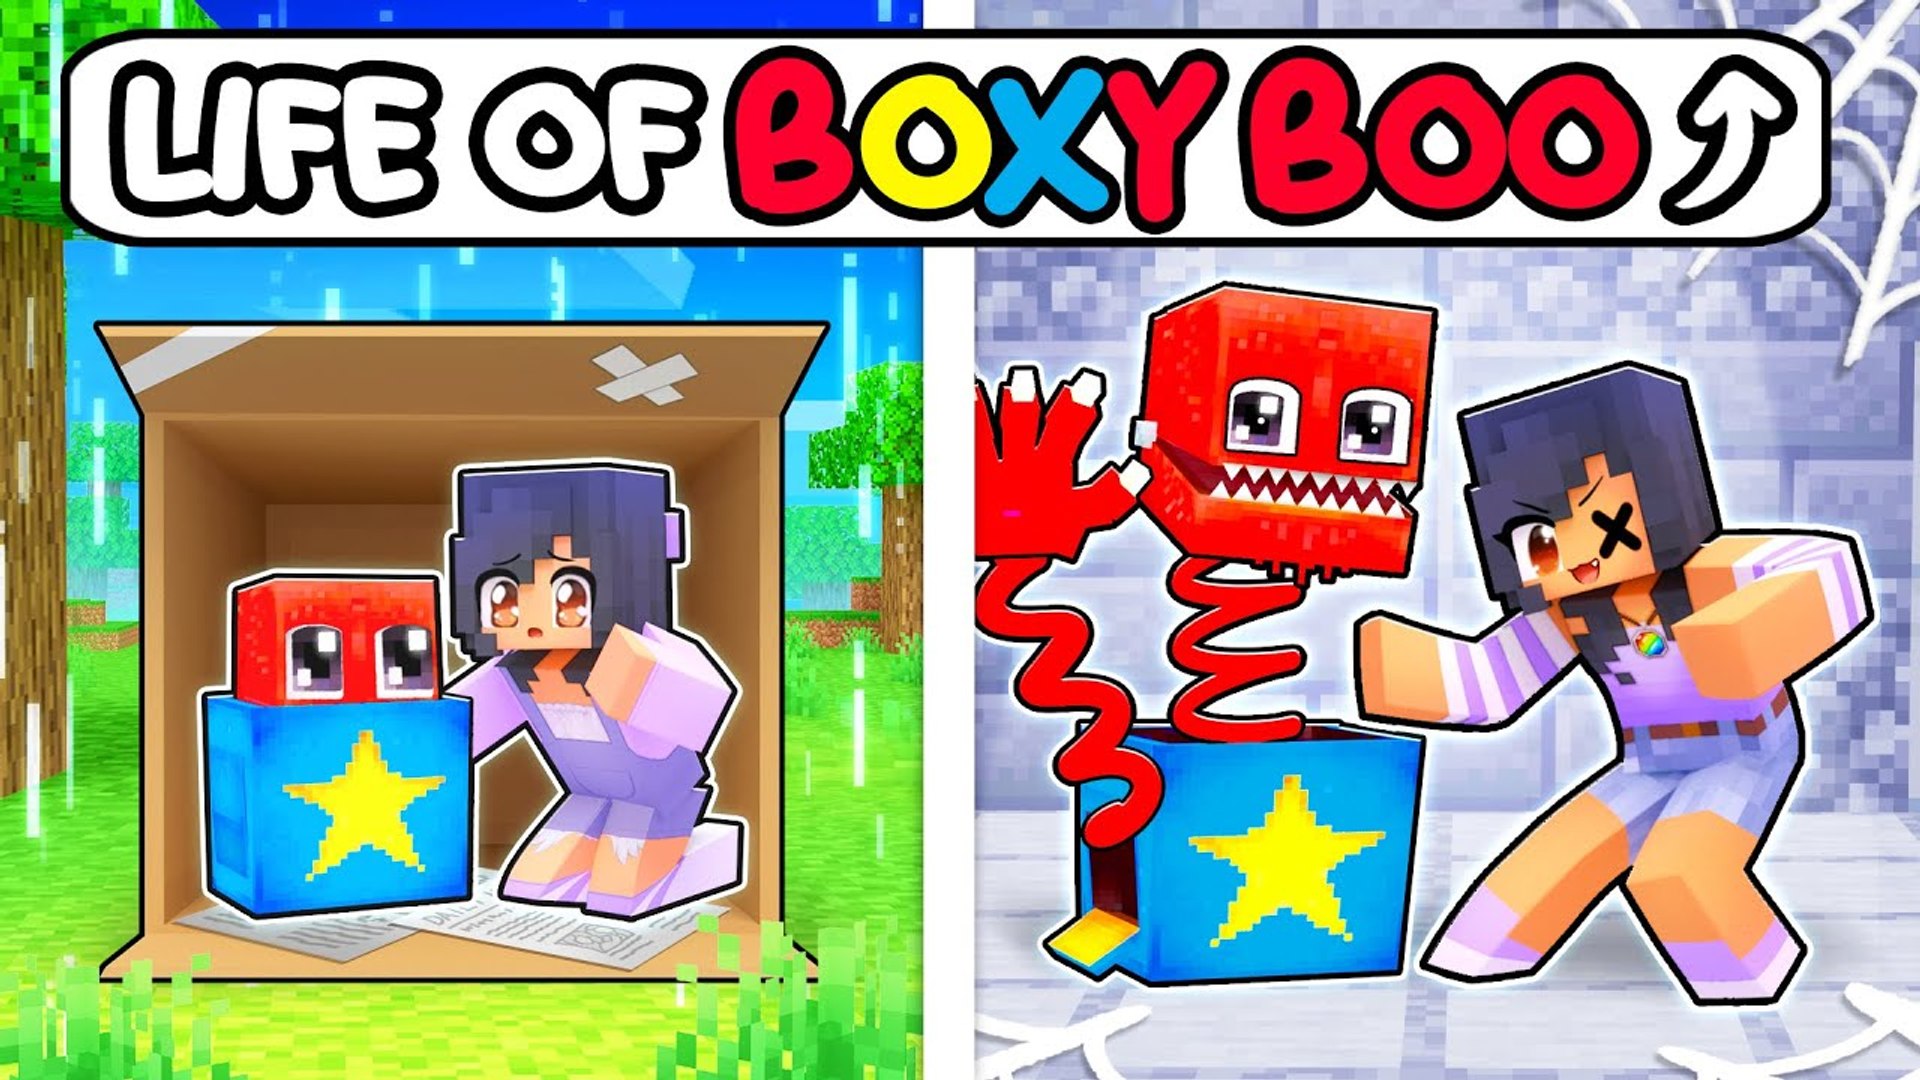 BOXY BOO is NOT a MONSTER (Cartoon Animation) 